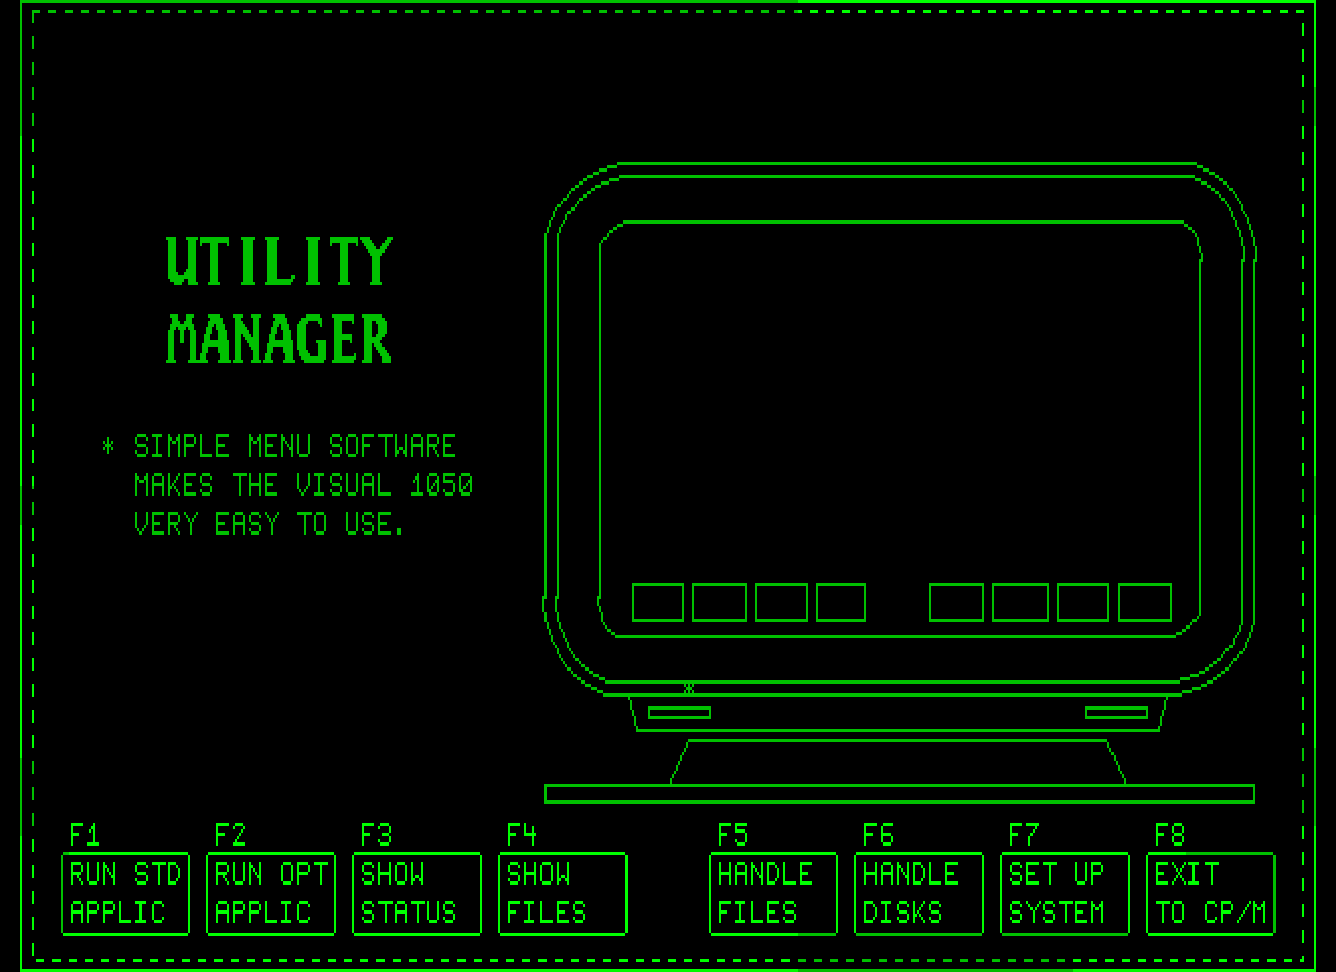 Demo Utility Manager